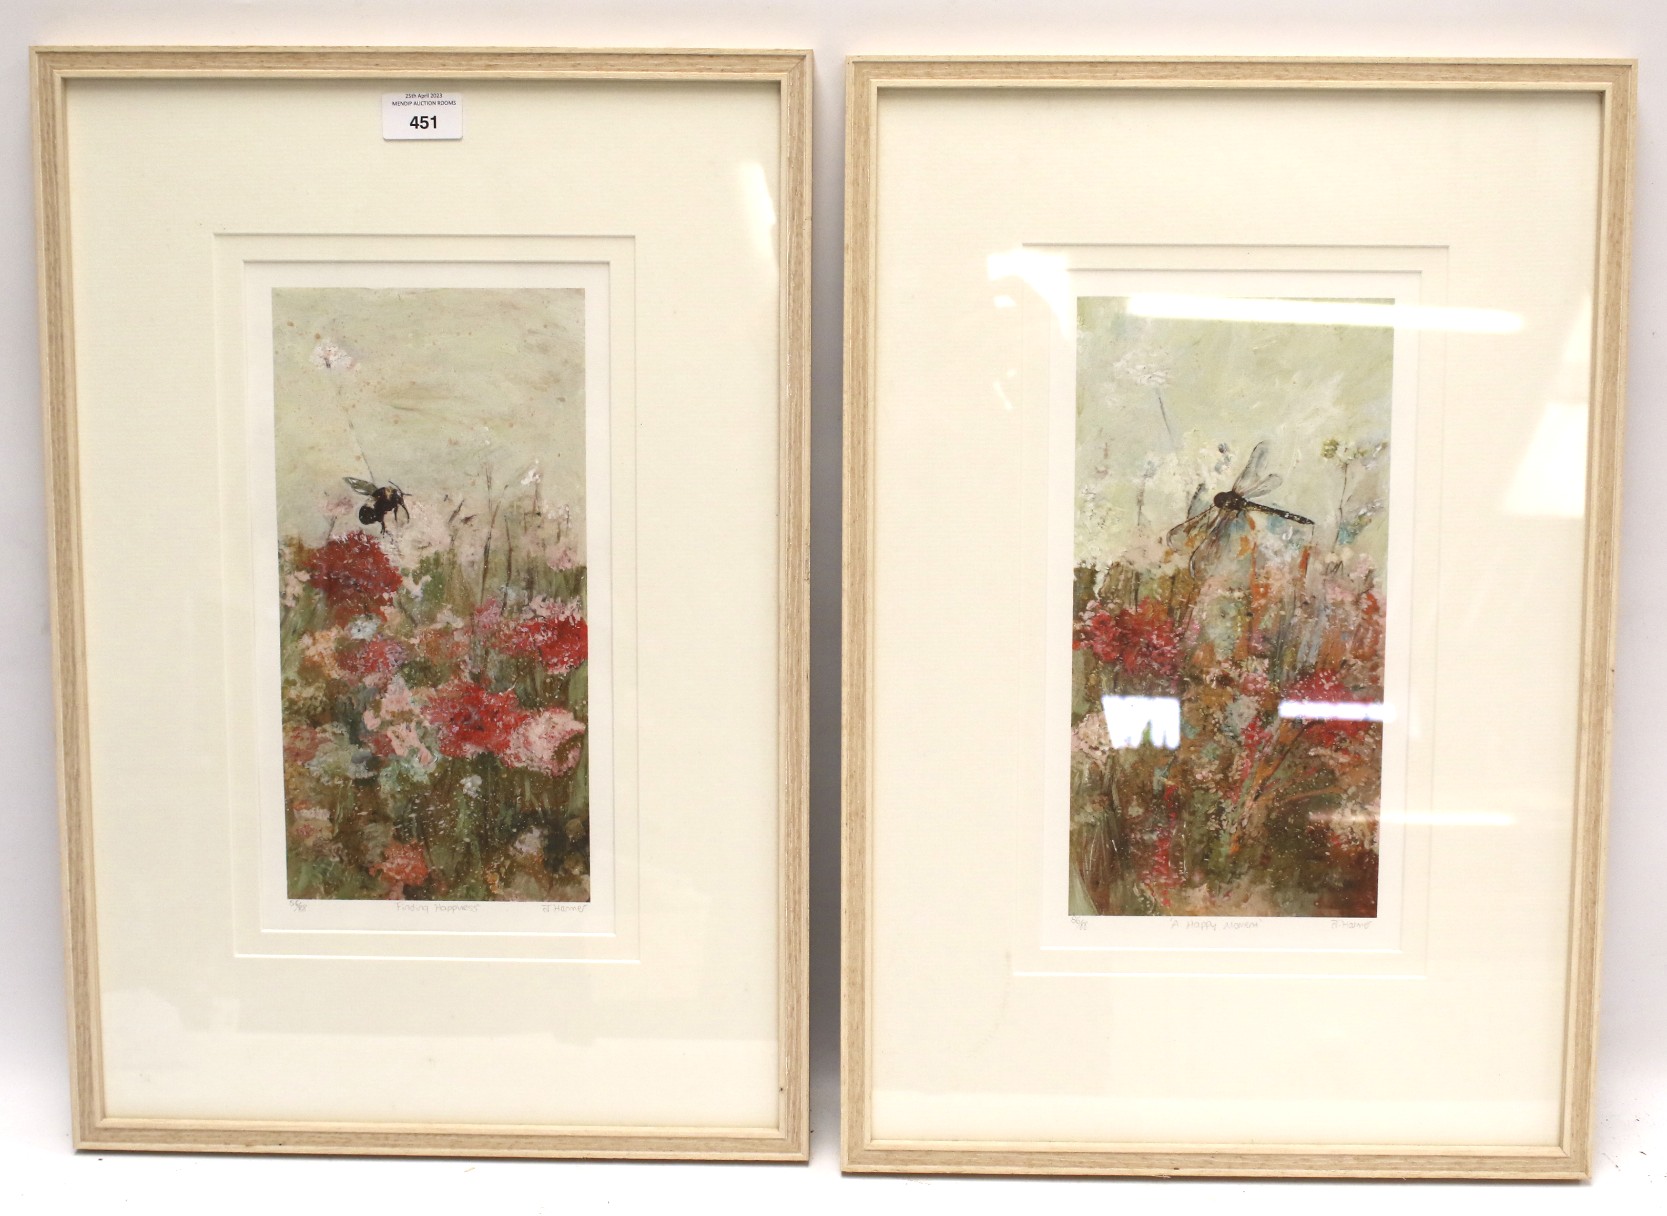 Joanne Harmer, two signed limited edition prints.